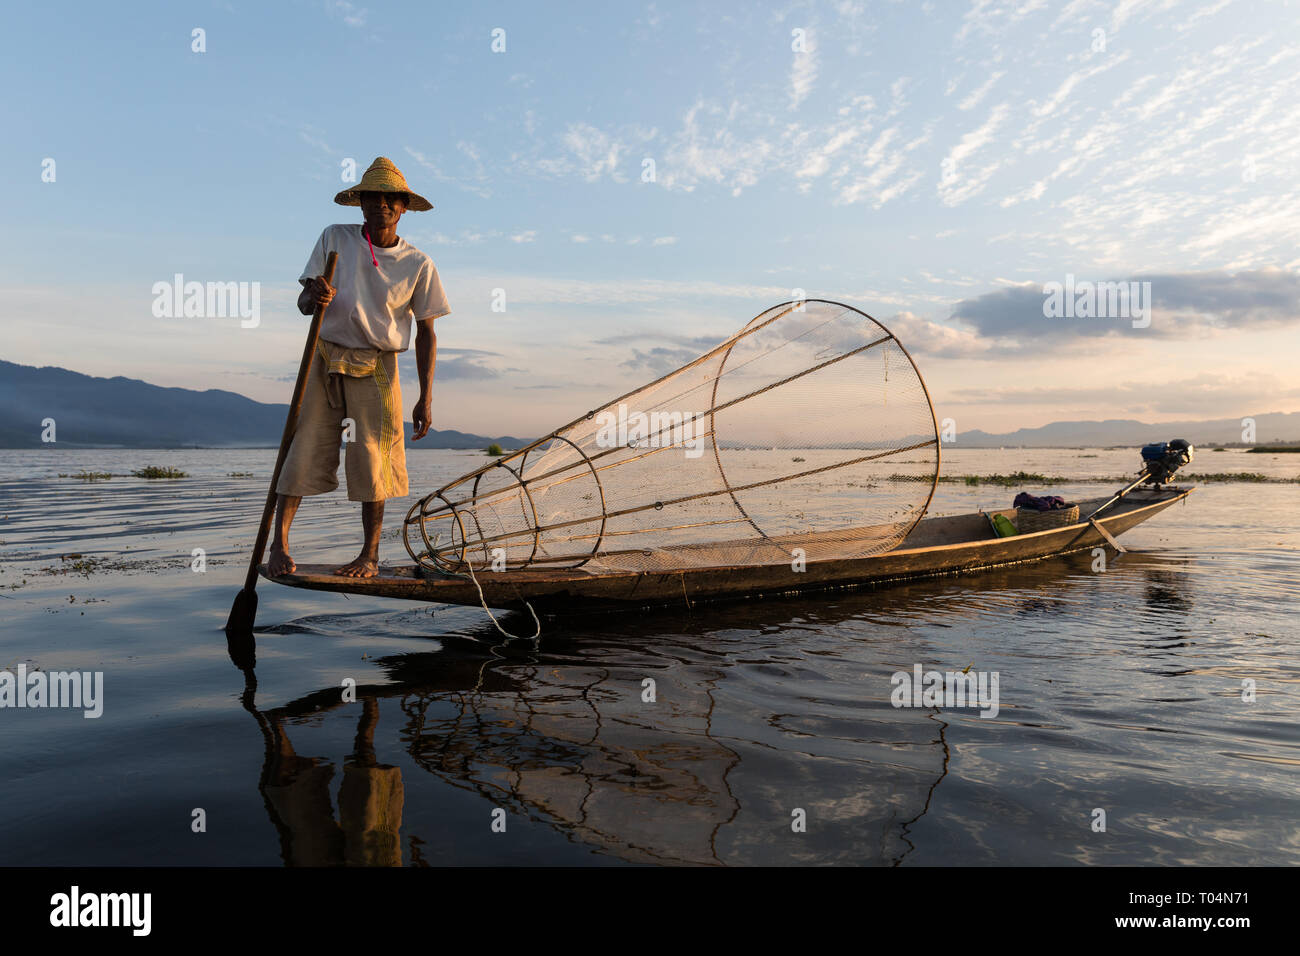 Fishermen fishing with big net in traditional and unique one-leg rowing  style during sunset on Inle Lake in Shan State, Myanmar, Burma Stock Photo  - Alamy